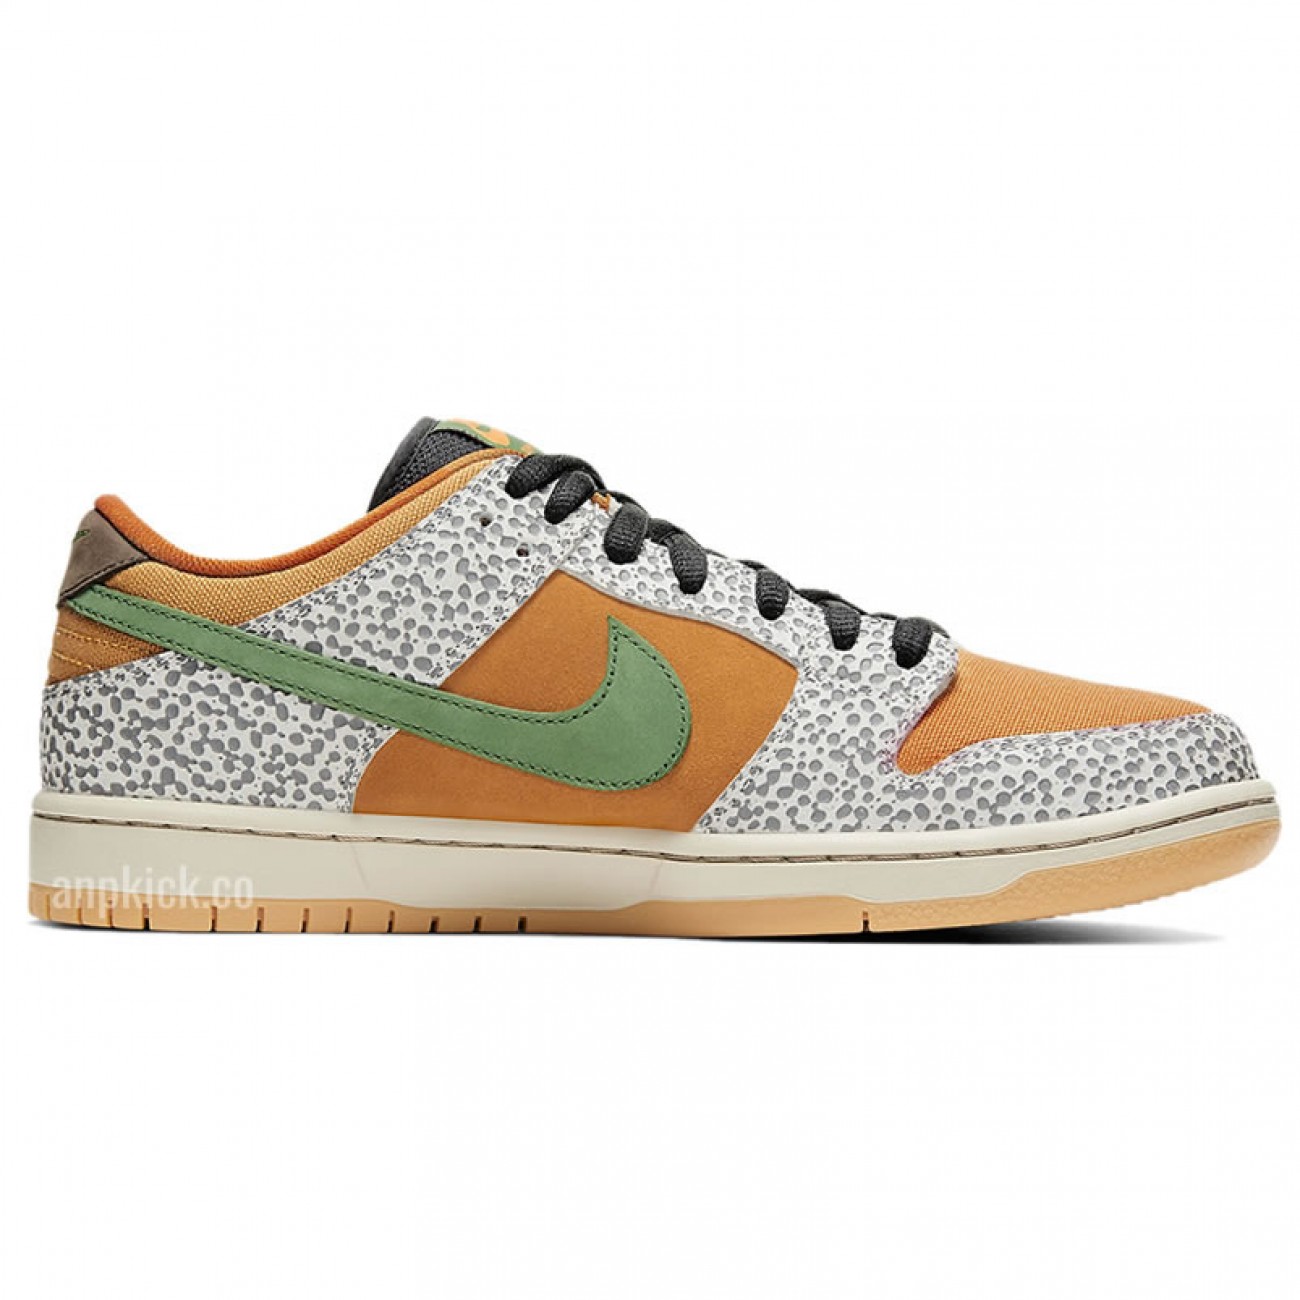 Nike SB Dunk Low "Safari" Outfit For Sale Release Date CD2563-002